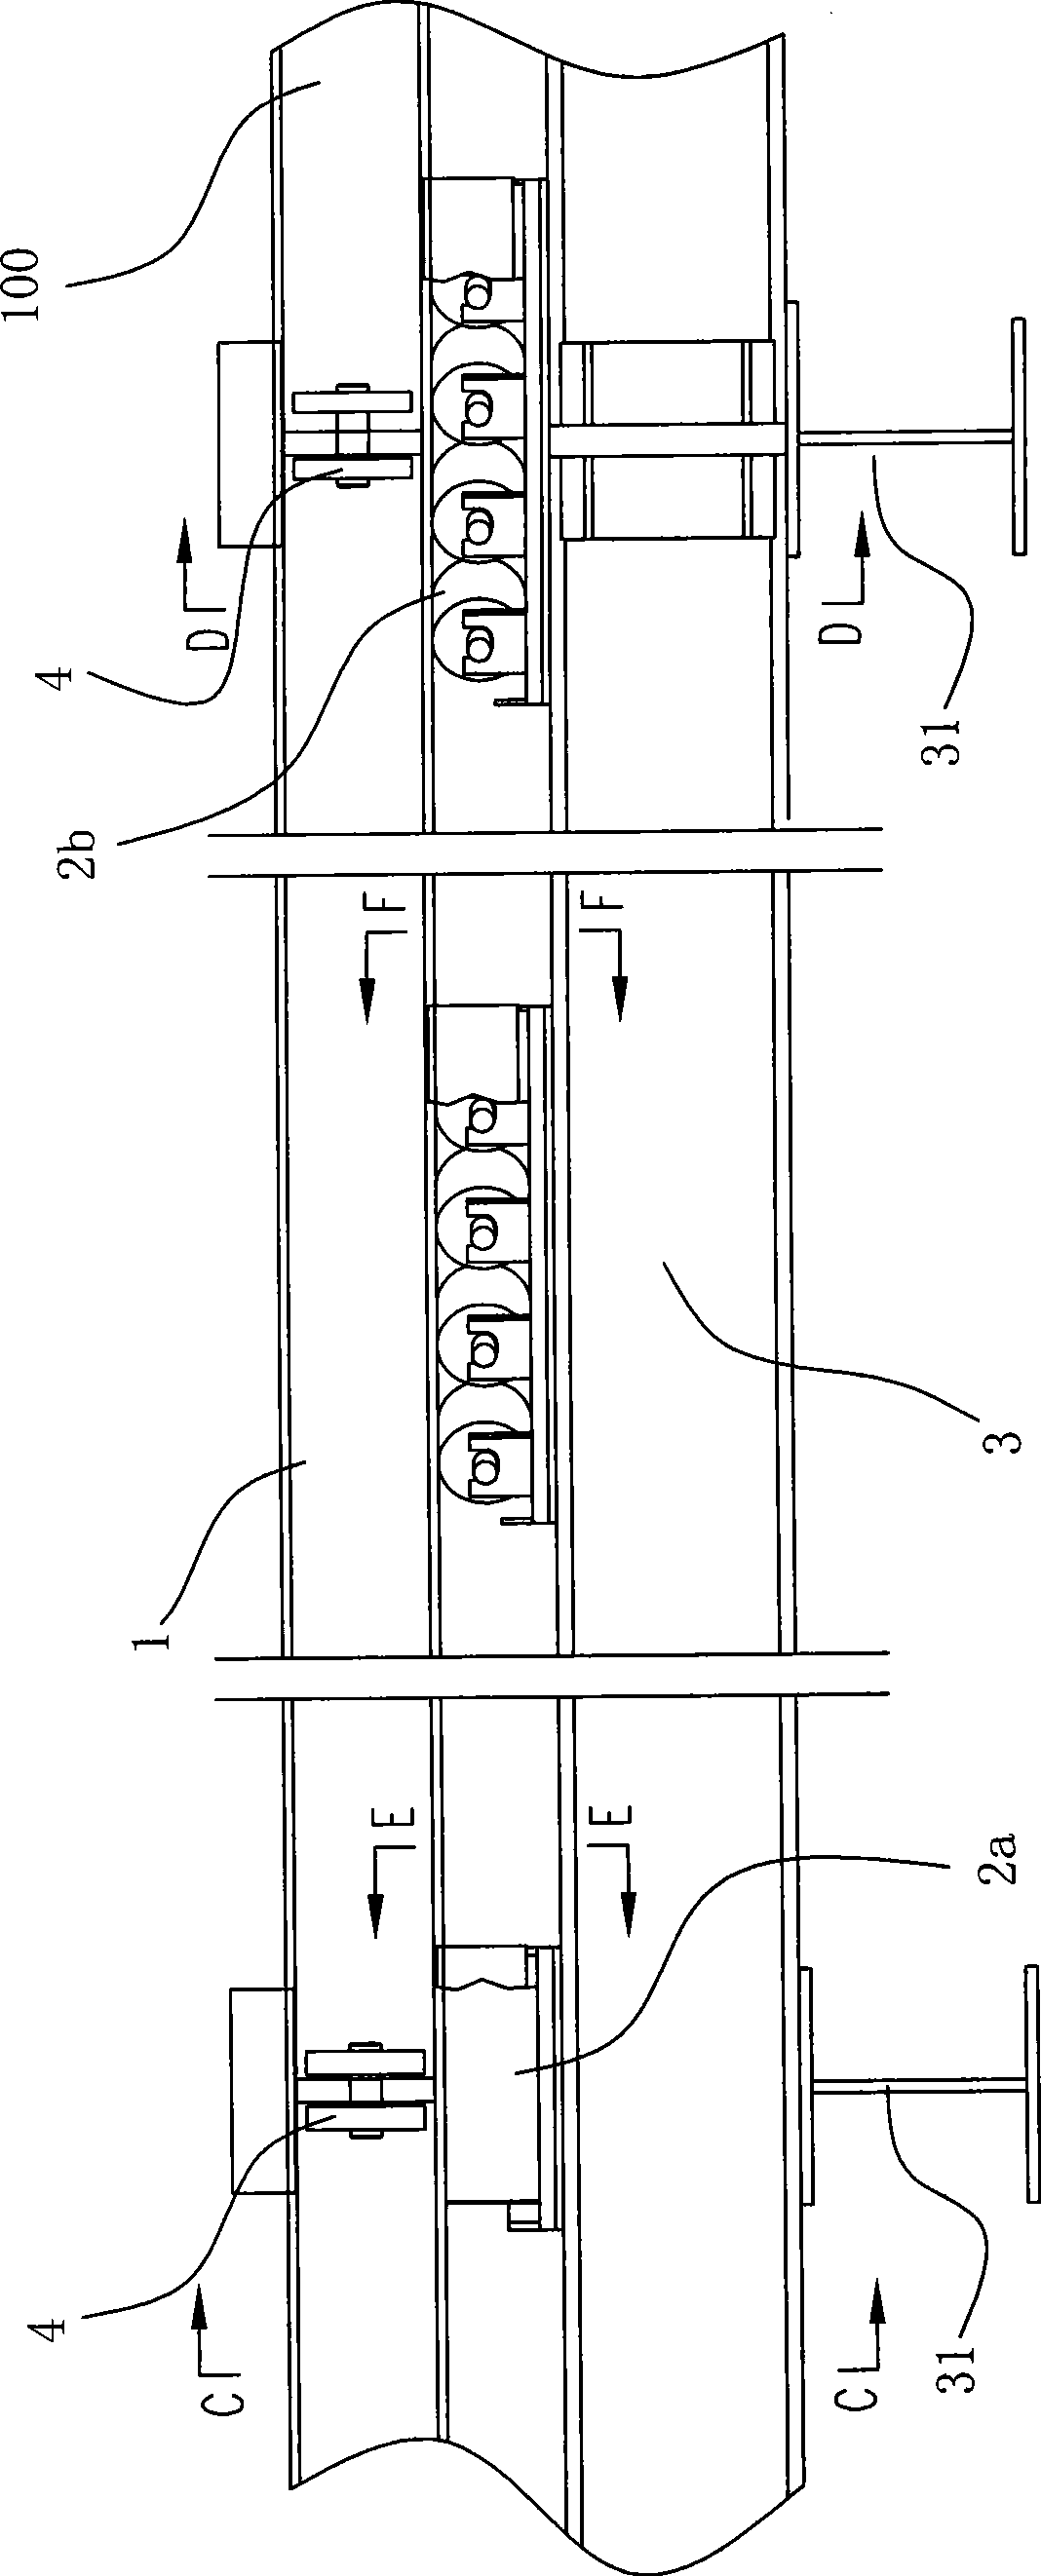 Supporting device for supporting waste heat boiler